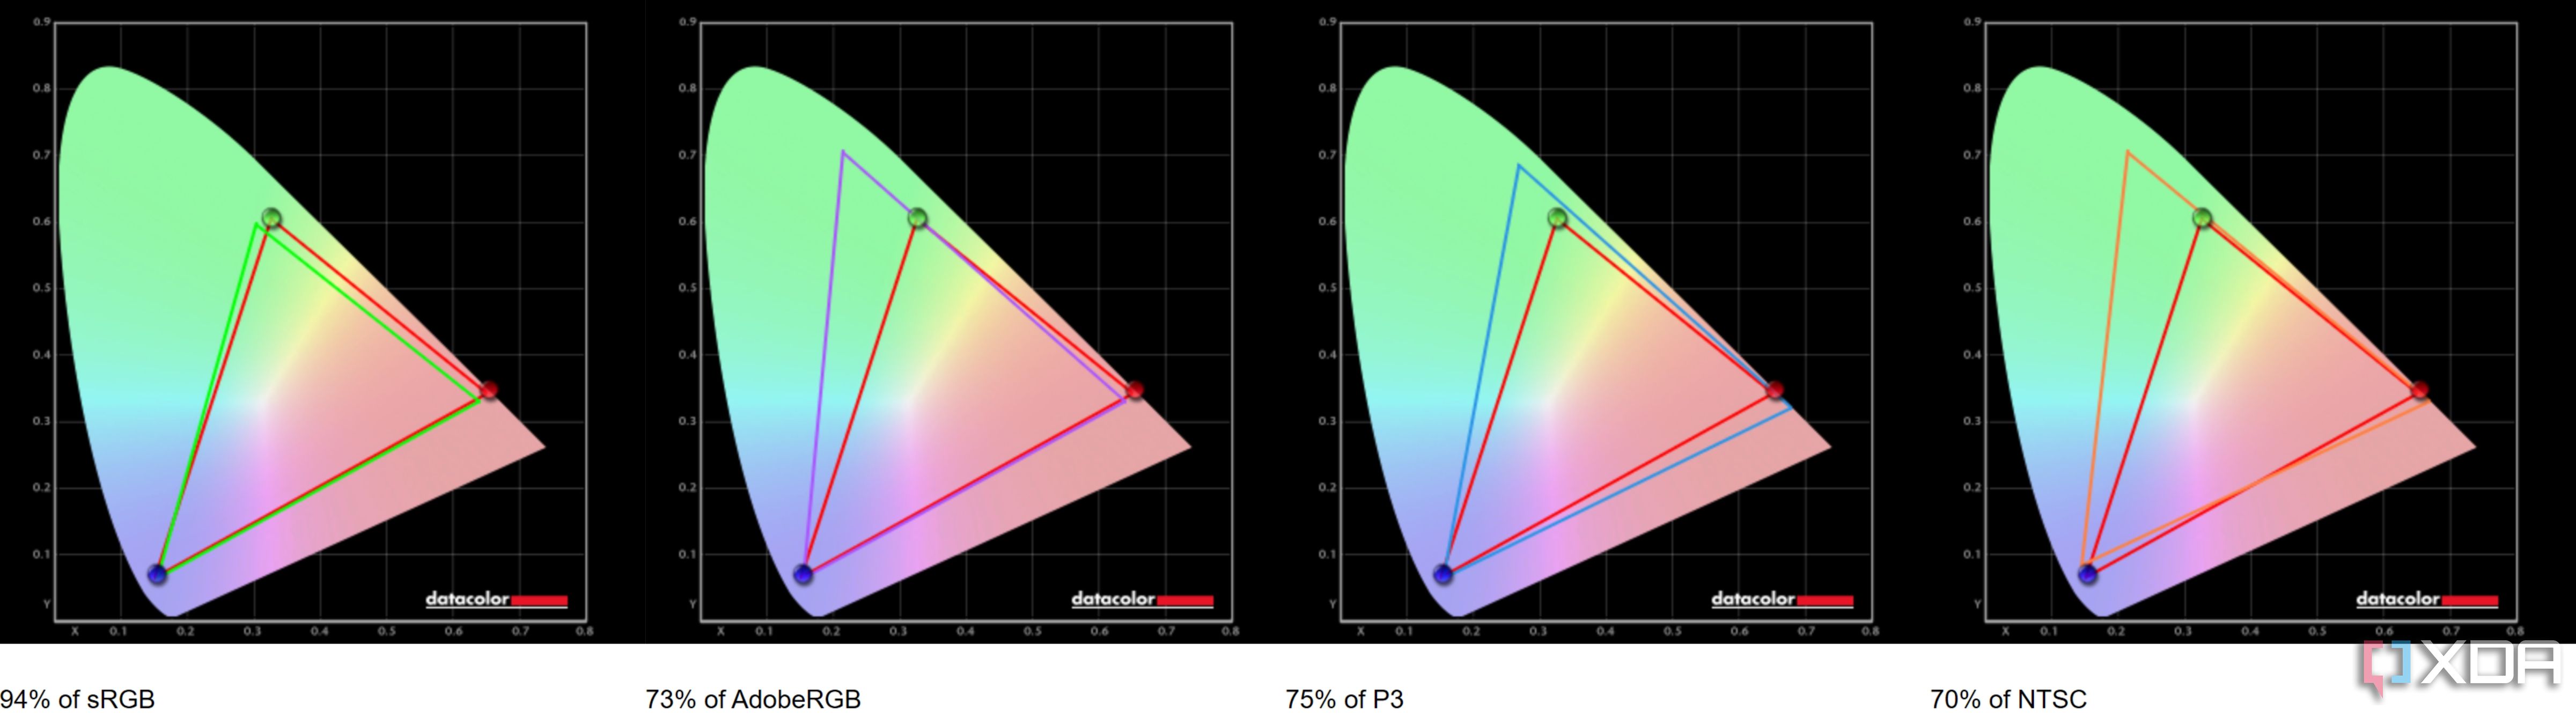 Color coverage results for the Slide V2 portable monitor, showing 94% coverage of sRGB, 73% of Adobe RGB, 75% of P3, and 70% of NTSC